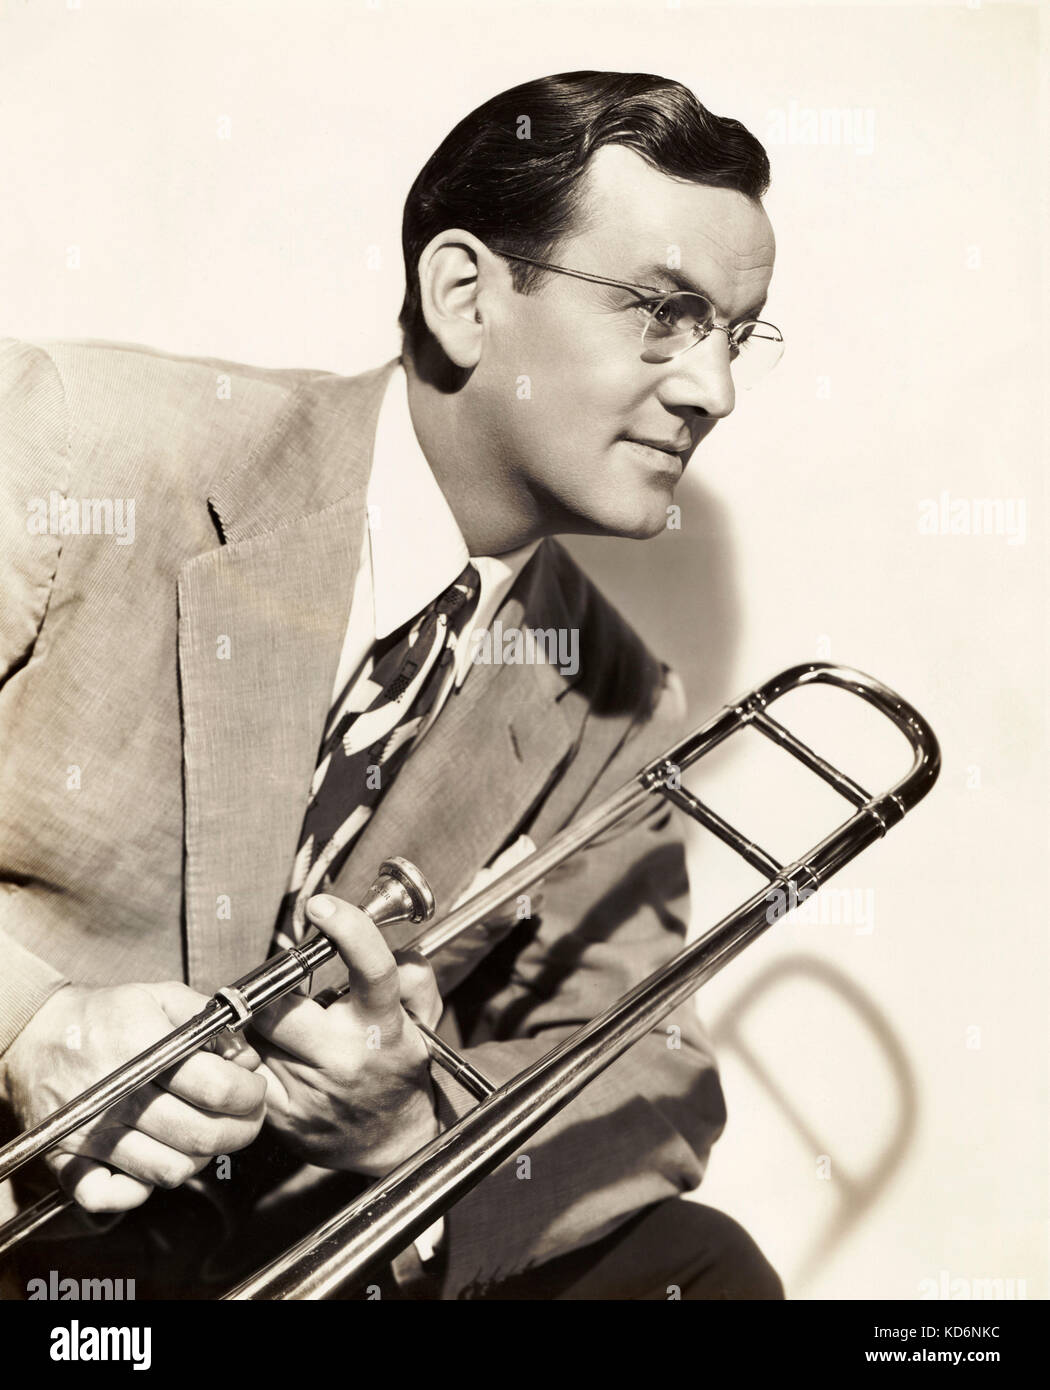 Glenn Miller - portrait with trumpet - American jazz musician and band leader in the Swing era  - 1 March 1904 - 15 December 1944 Stock Photo